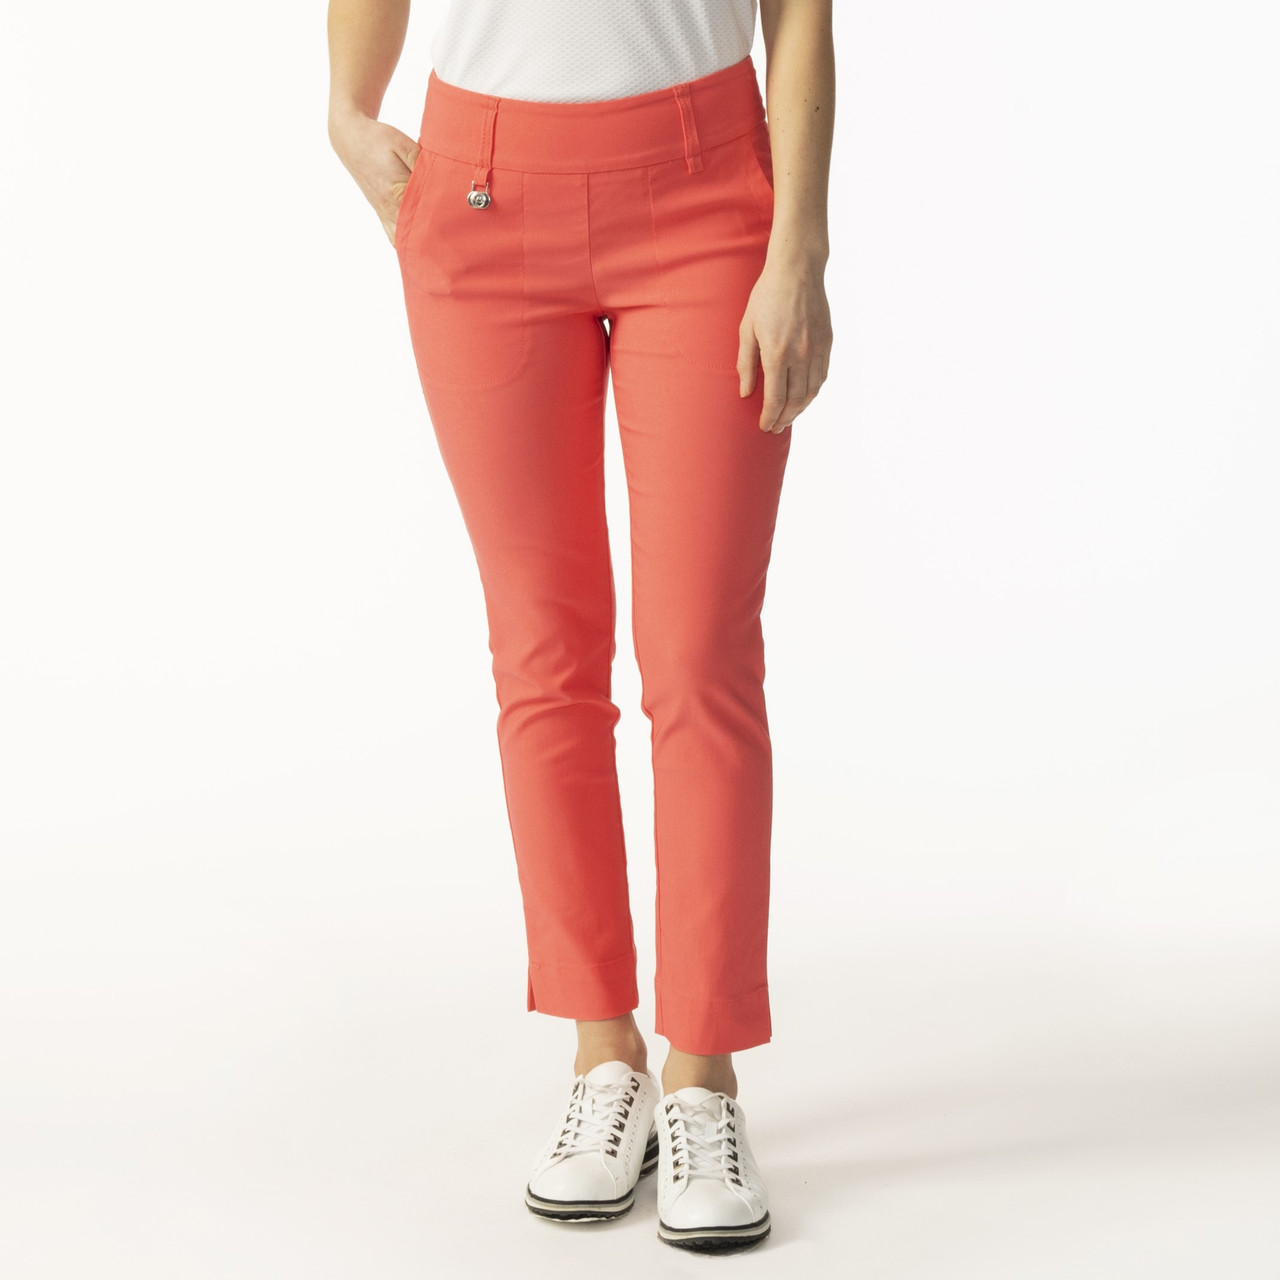 Daily Sports Magic Dahlia High Water Ankle Pants - Pink